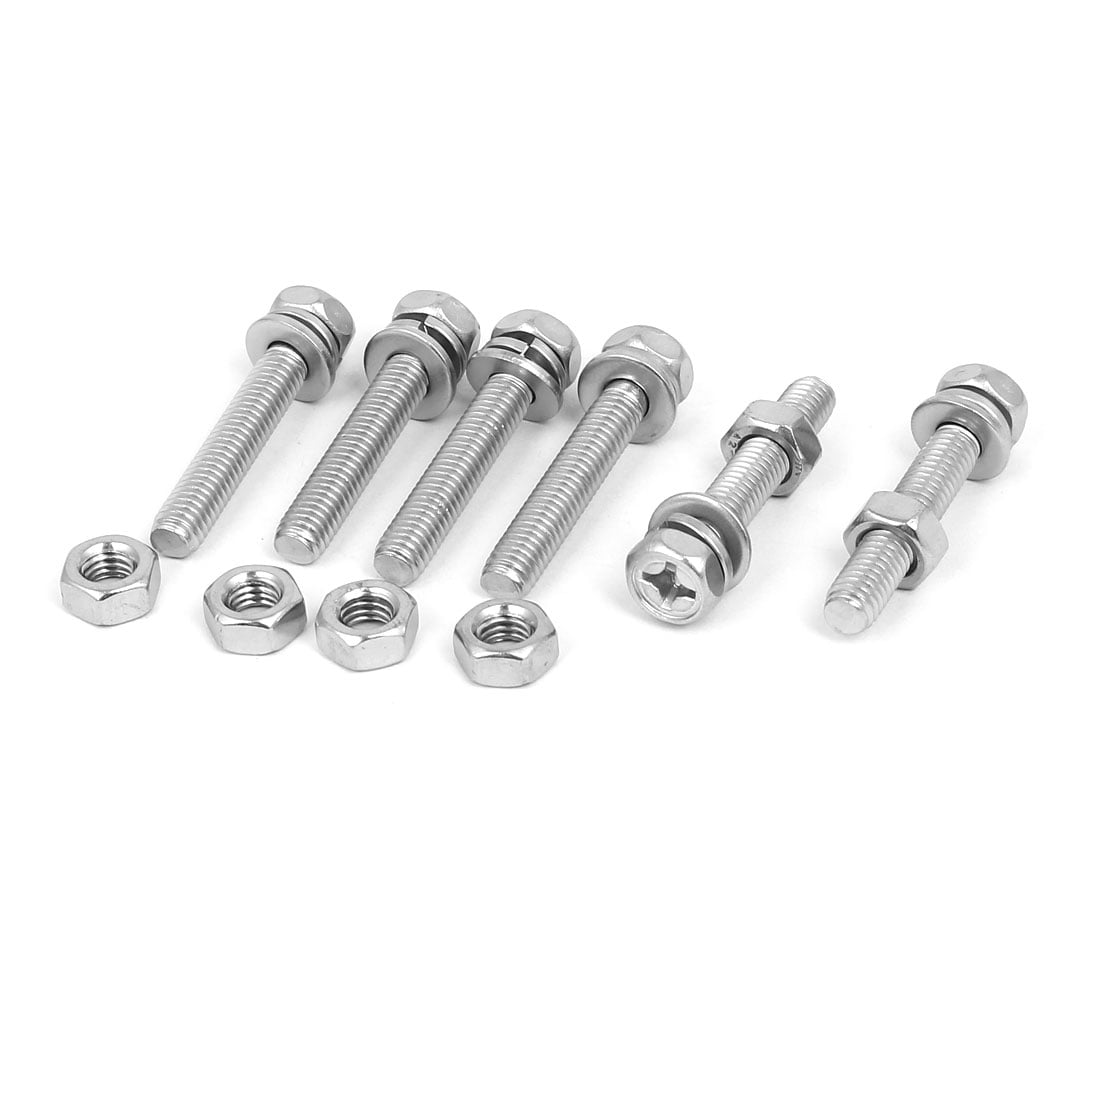 THIN HEXAGON NUTS A2 STAINLESS STEEL FOR SCREWS AND BOLTS M6 HALF 6mm Ø 